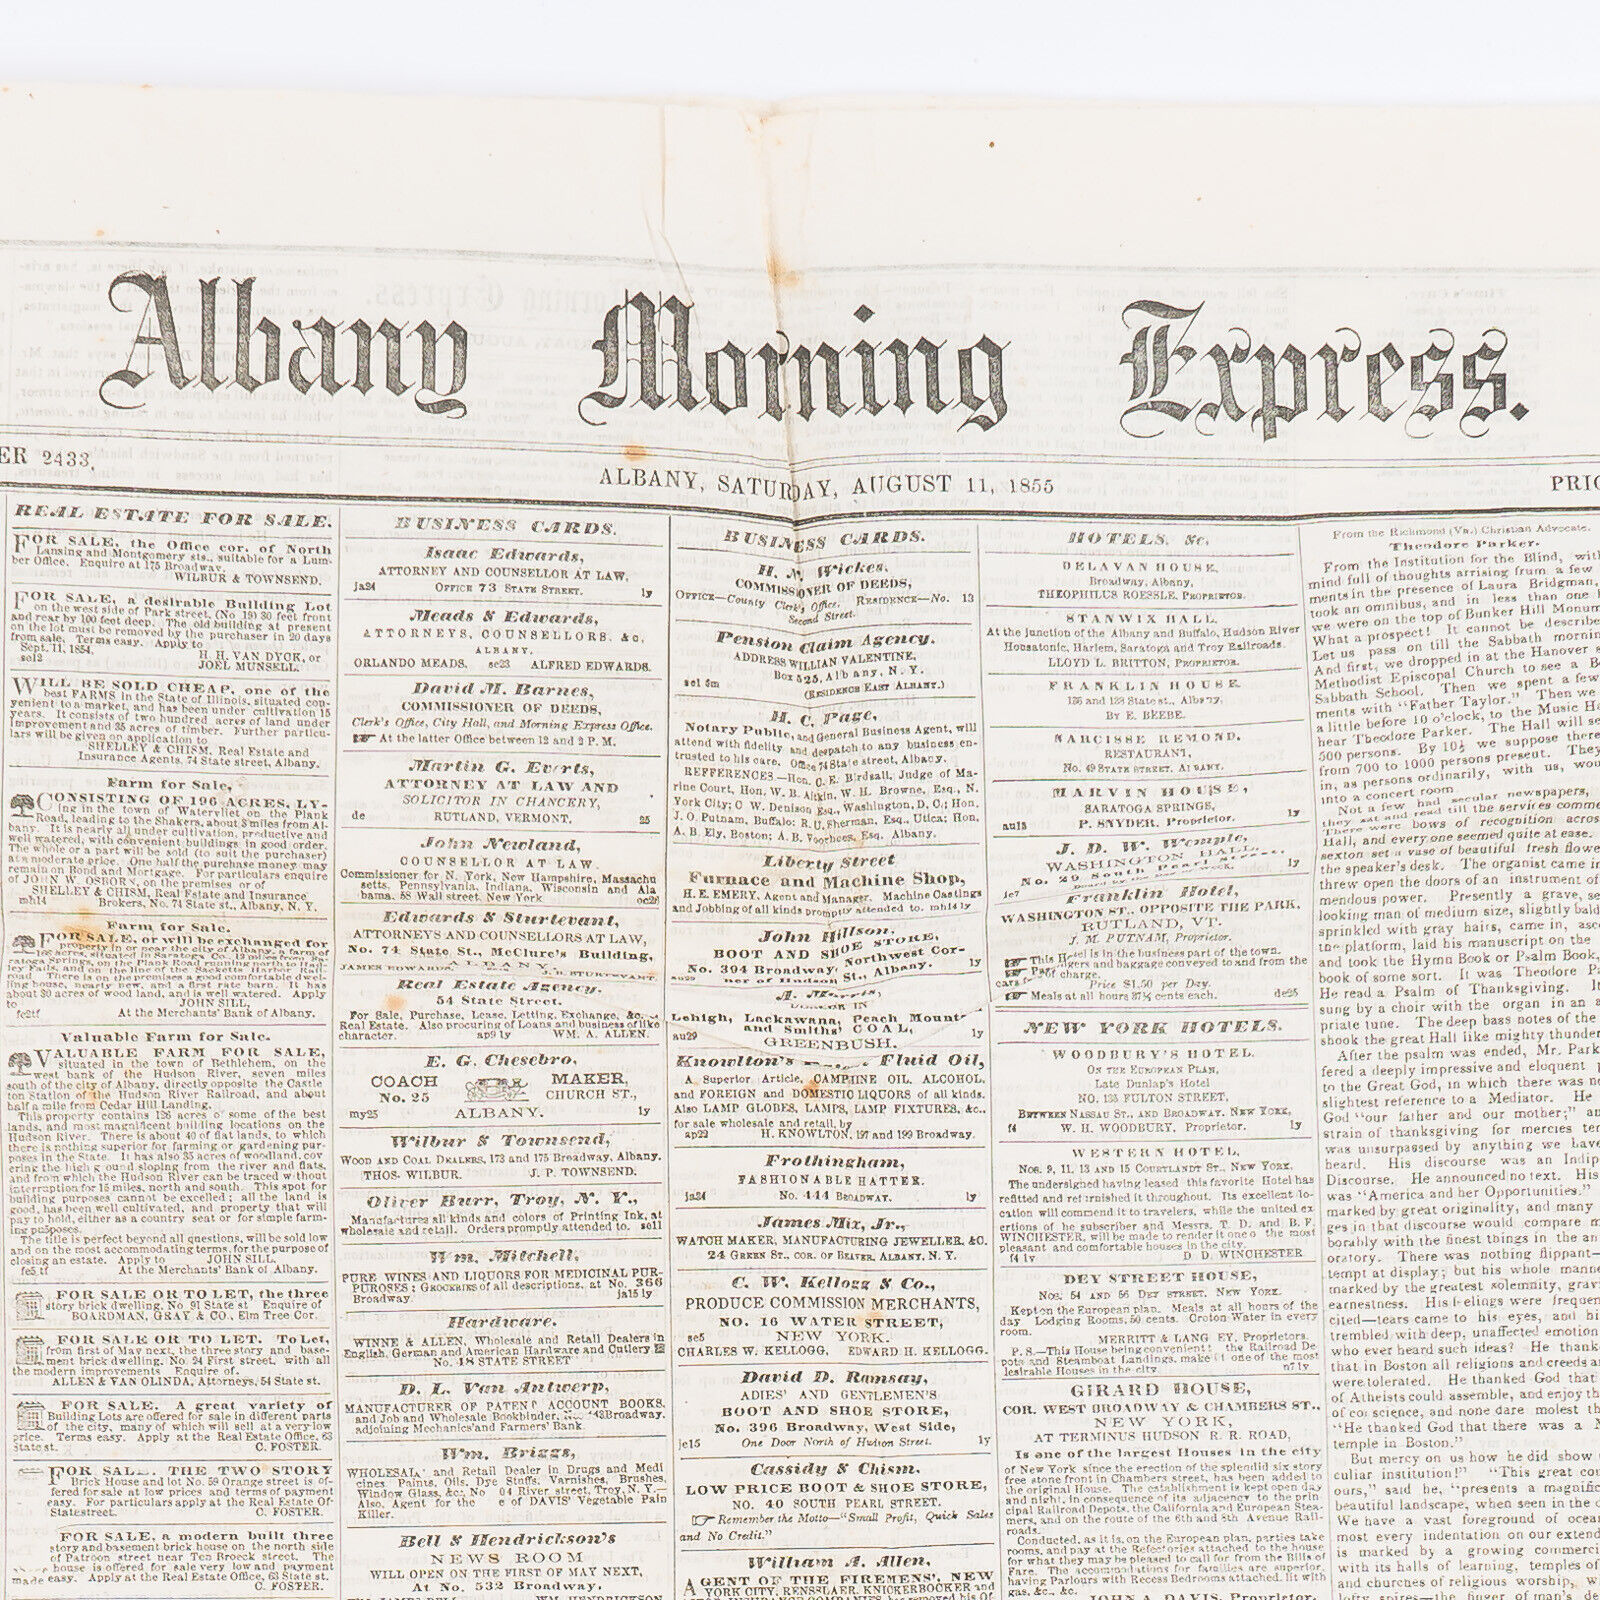 August 11, 1855 Albany Morning Express Newspaper - Story on Colt Revolver